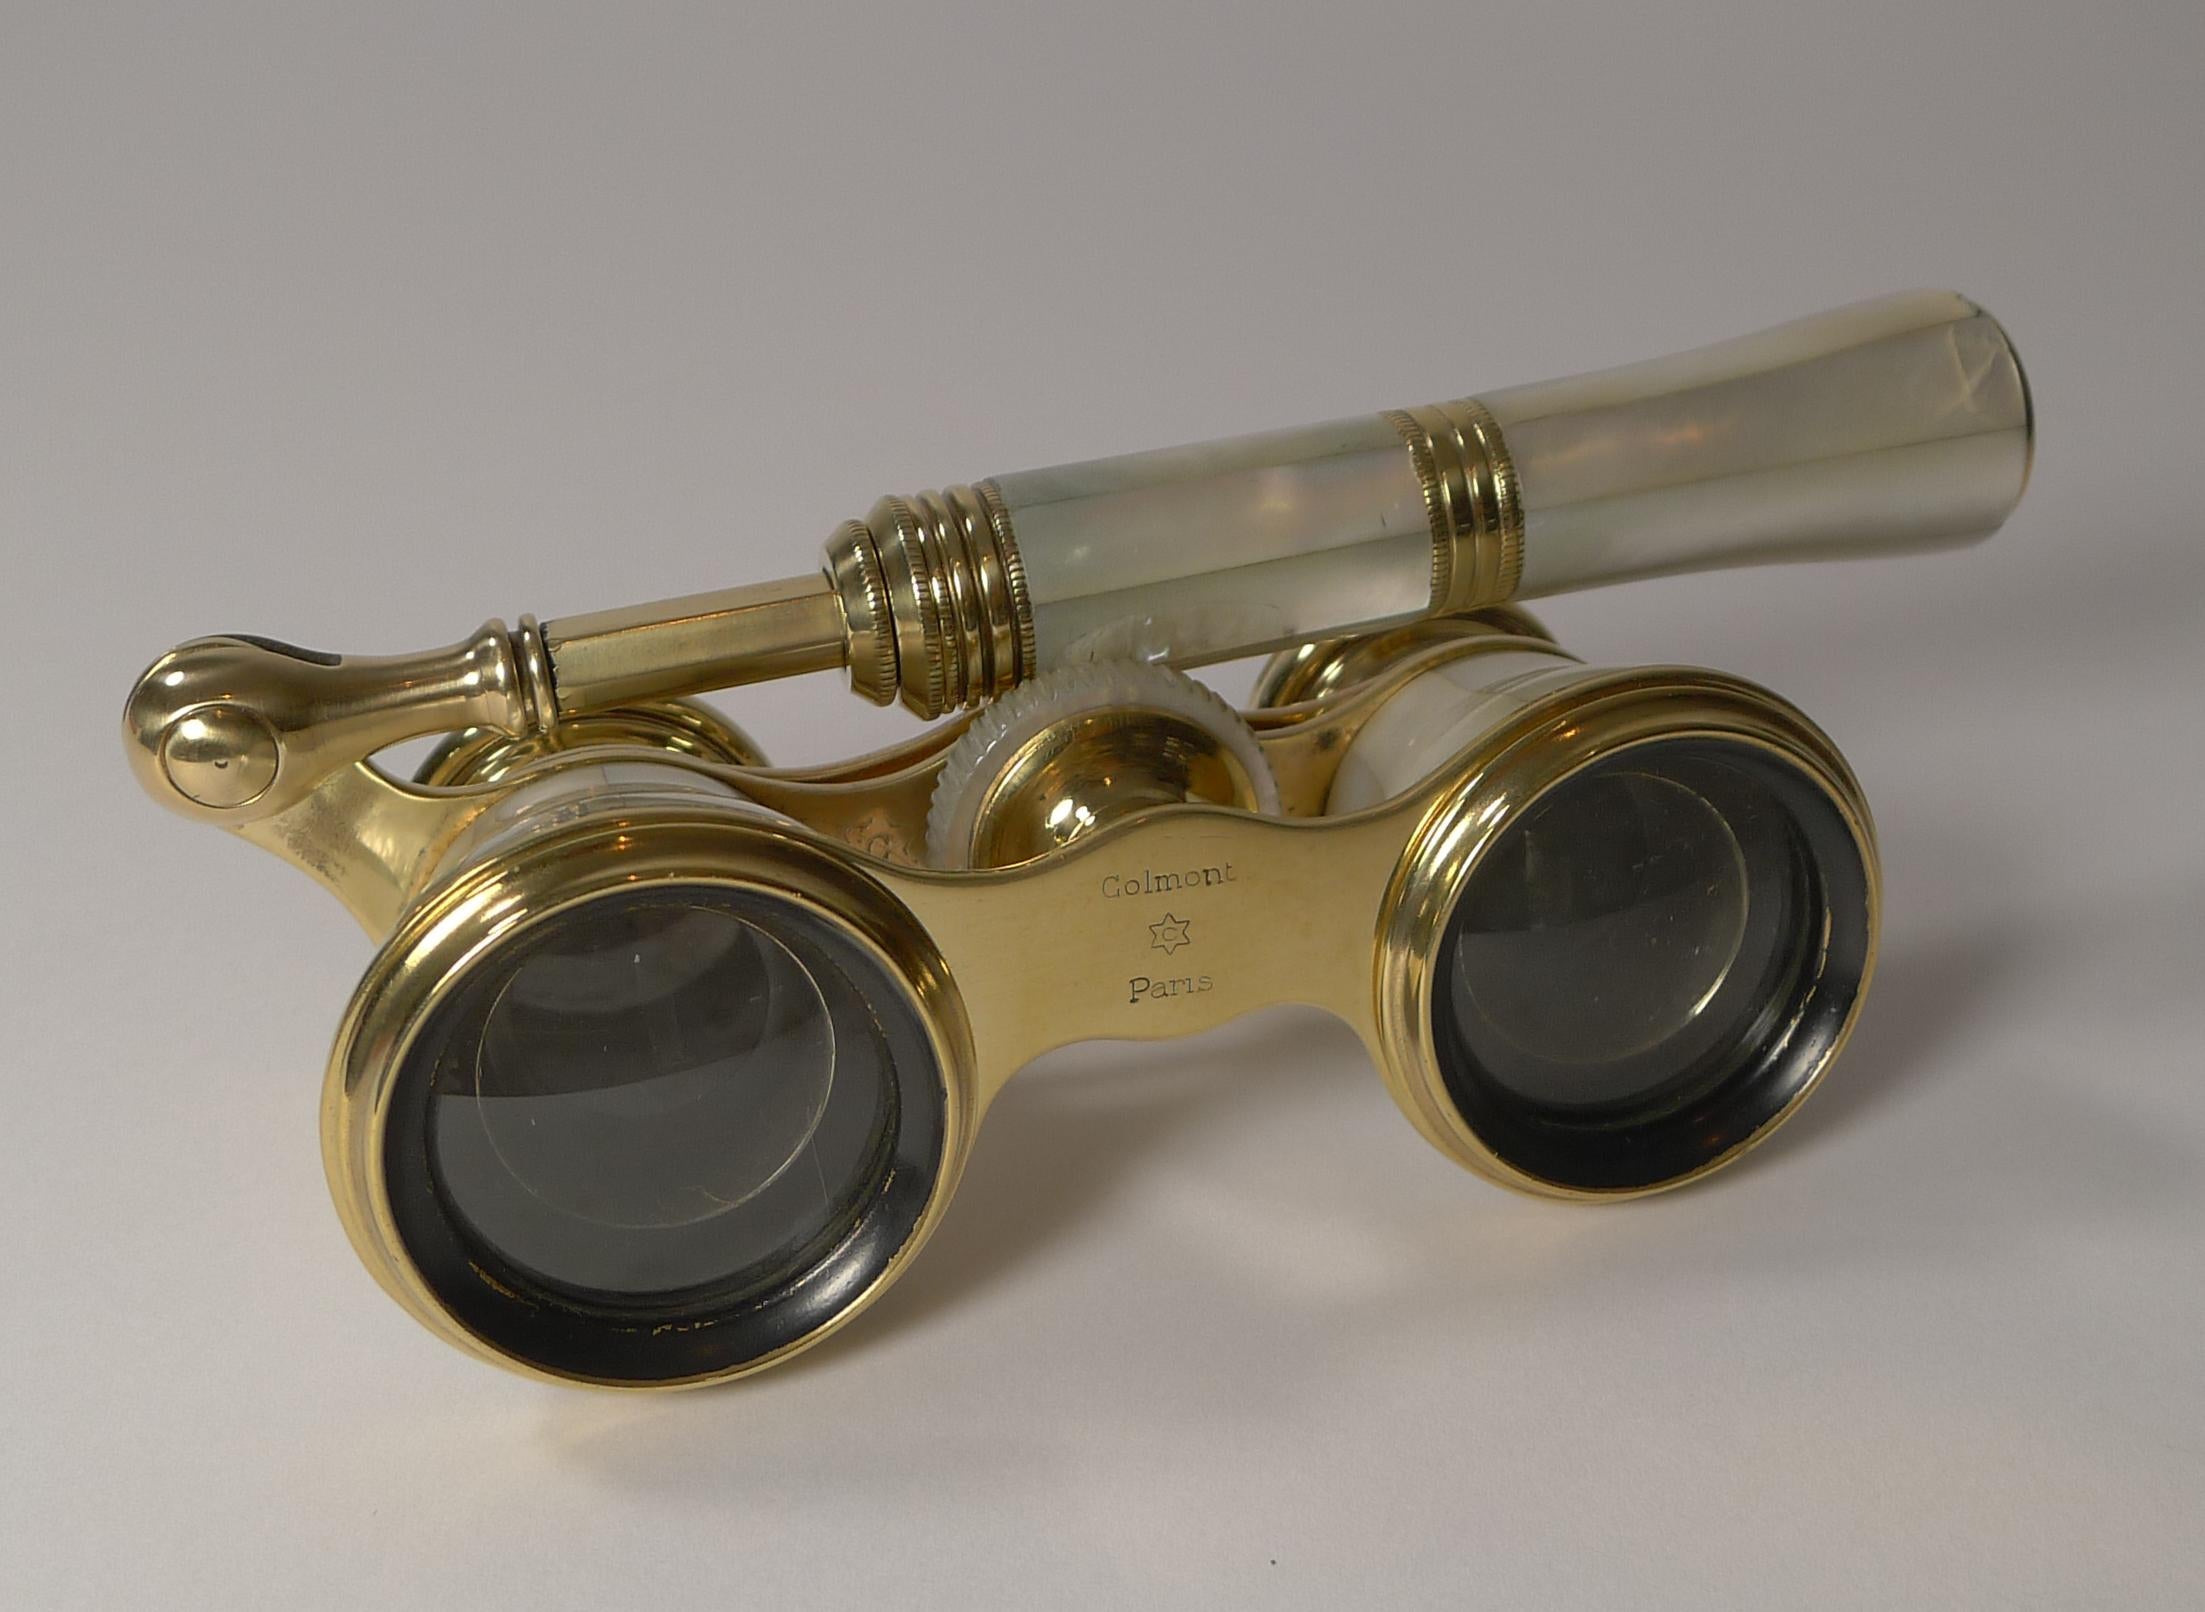 Early 20th Century Pair of Antique French Opera Glasses by Colmont, Paris